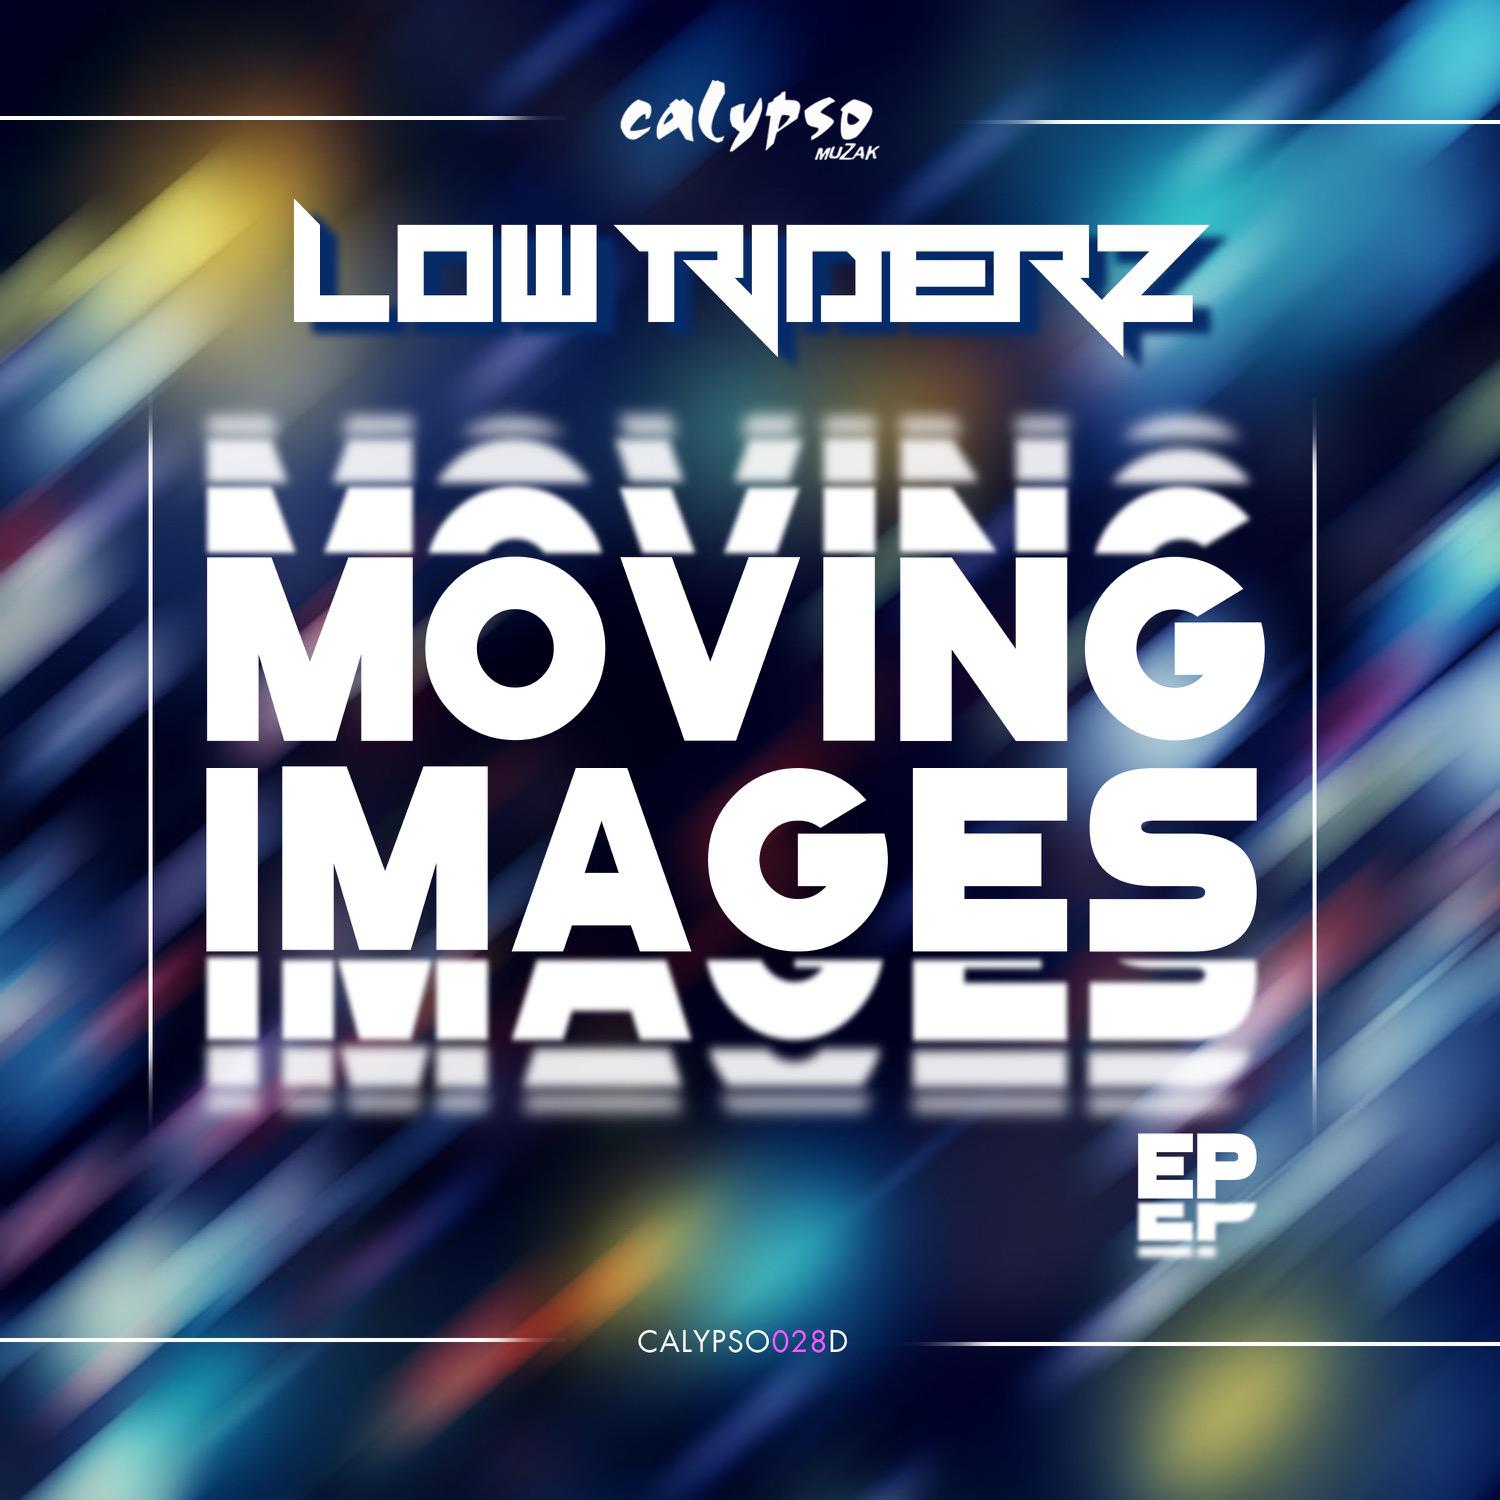 Moving Images